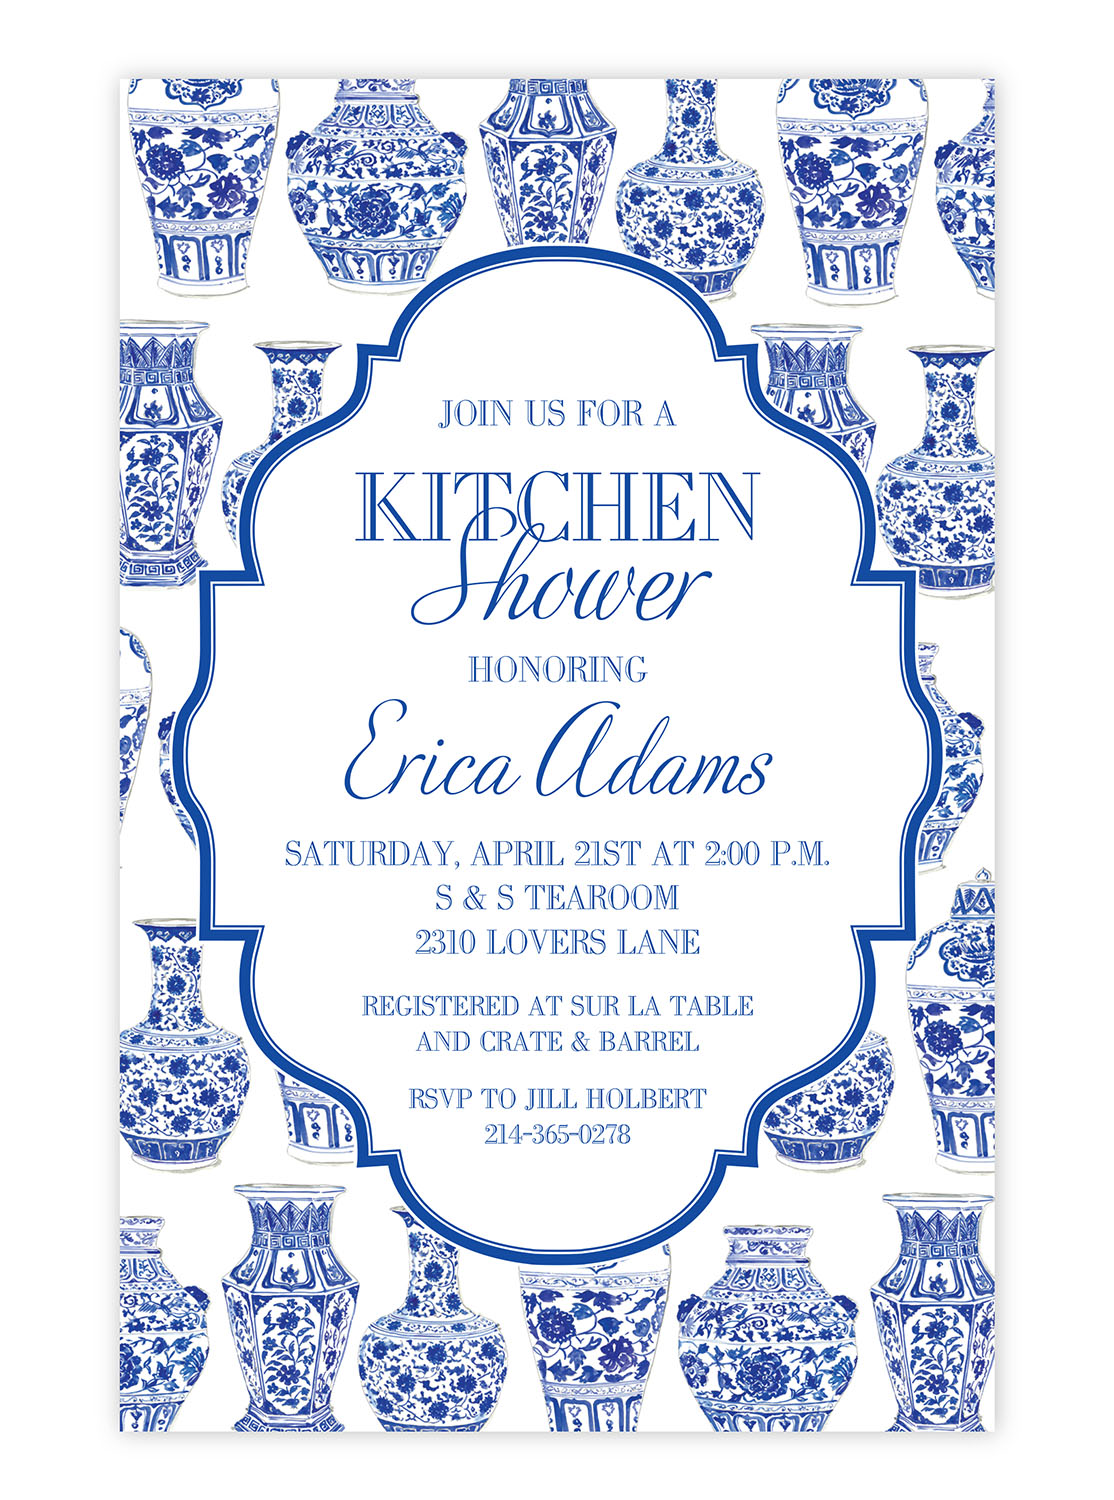 Blue and White Vases Invitation by Rosanne Beck 
															/ PrintsWell							